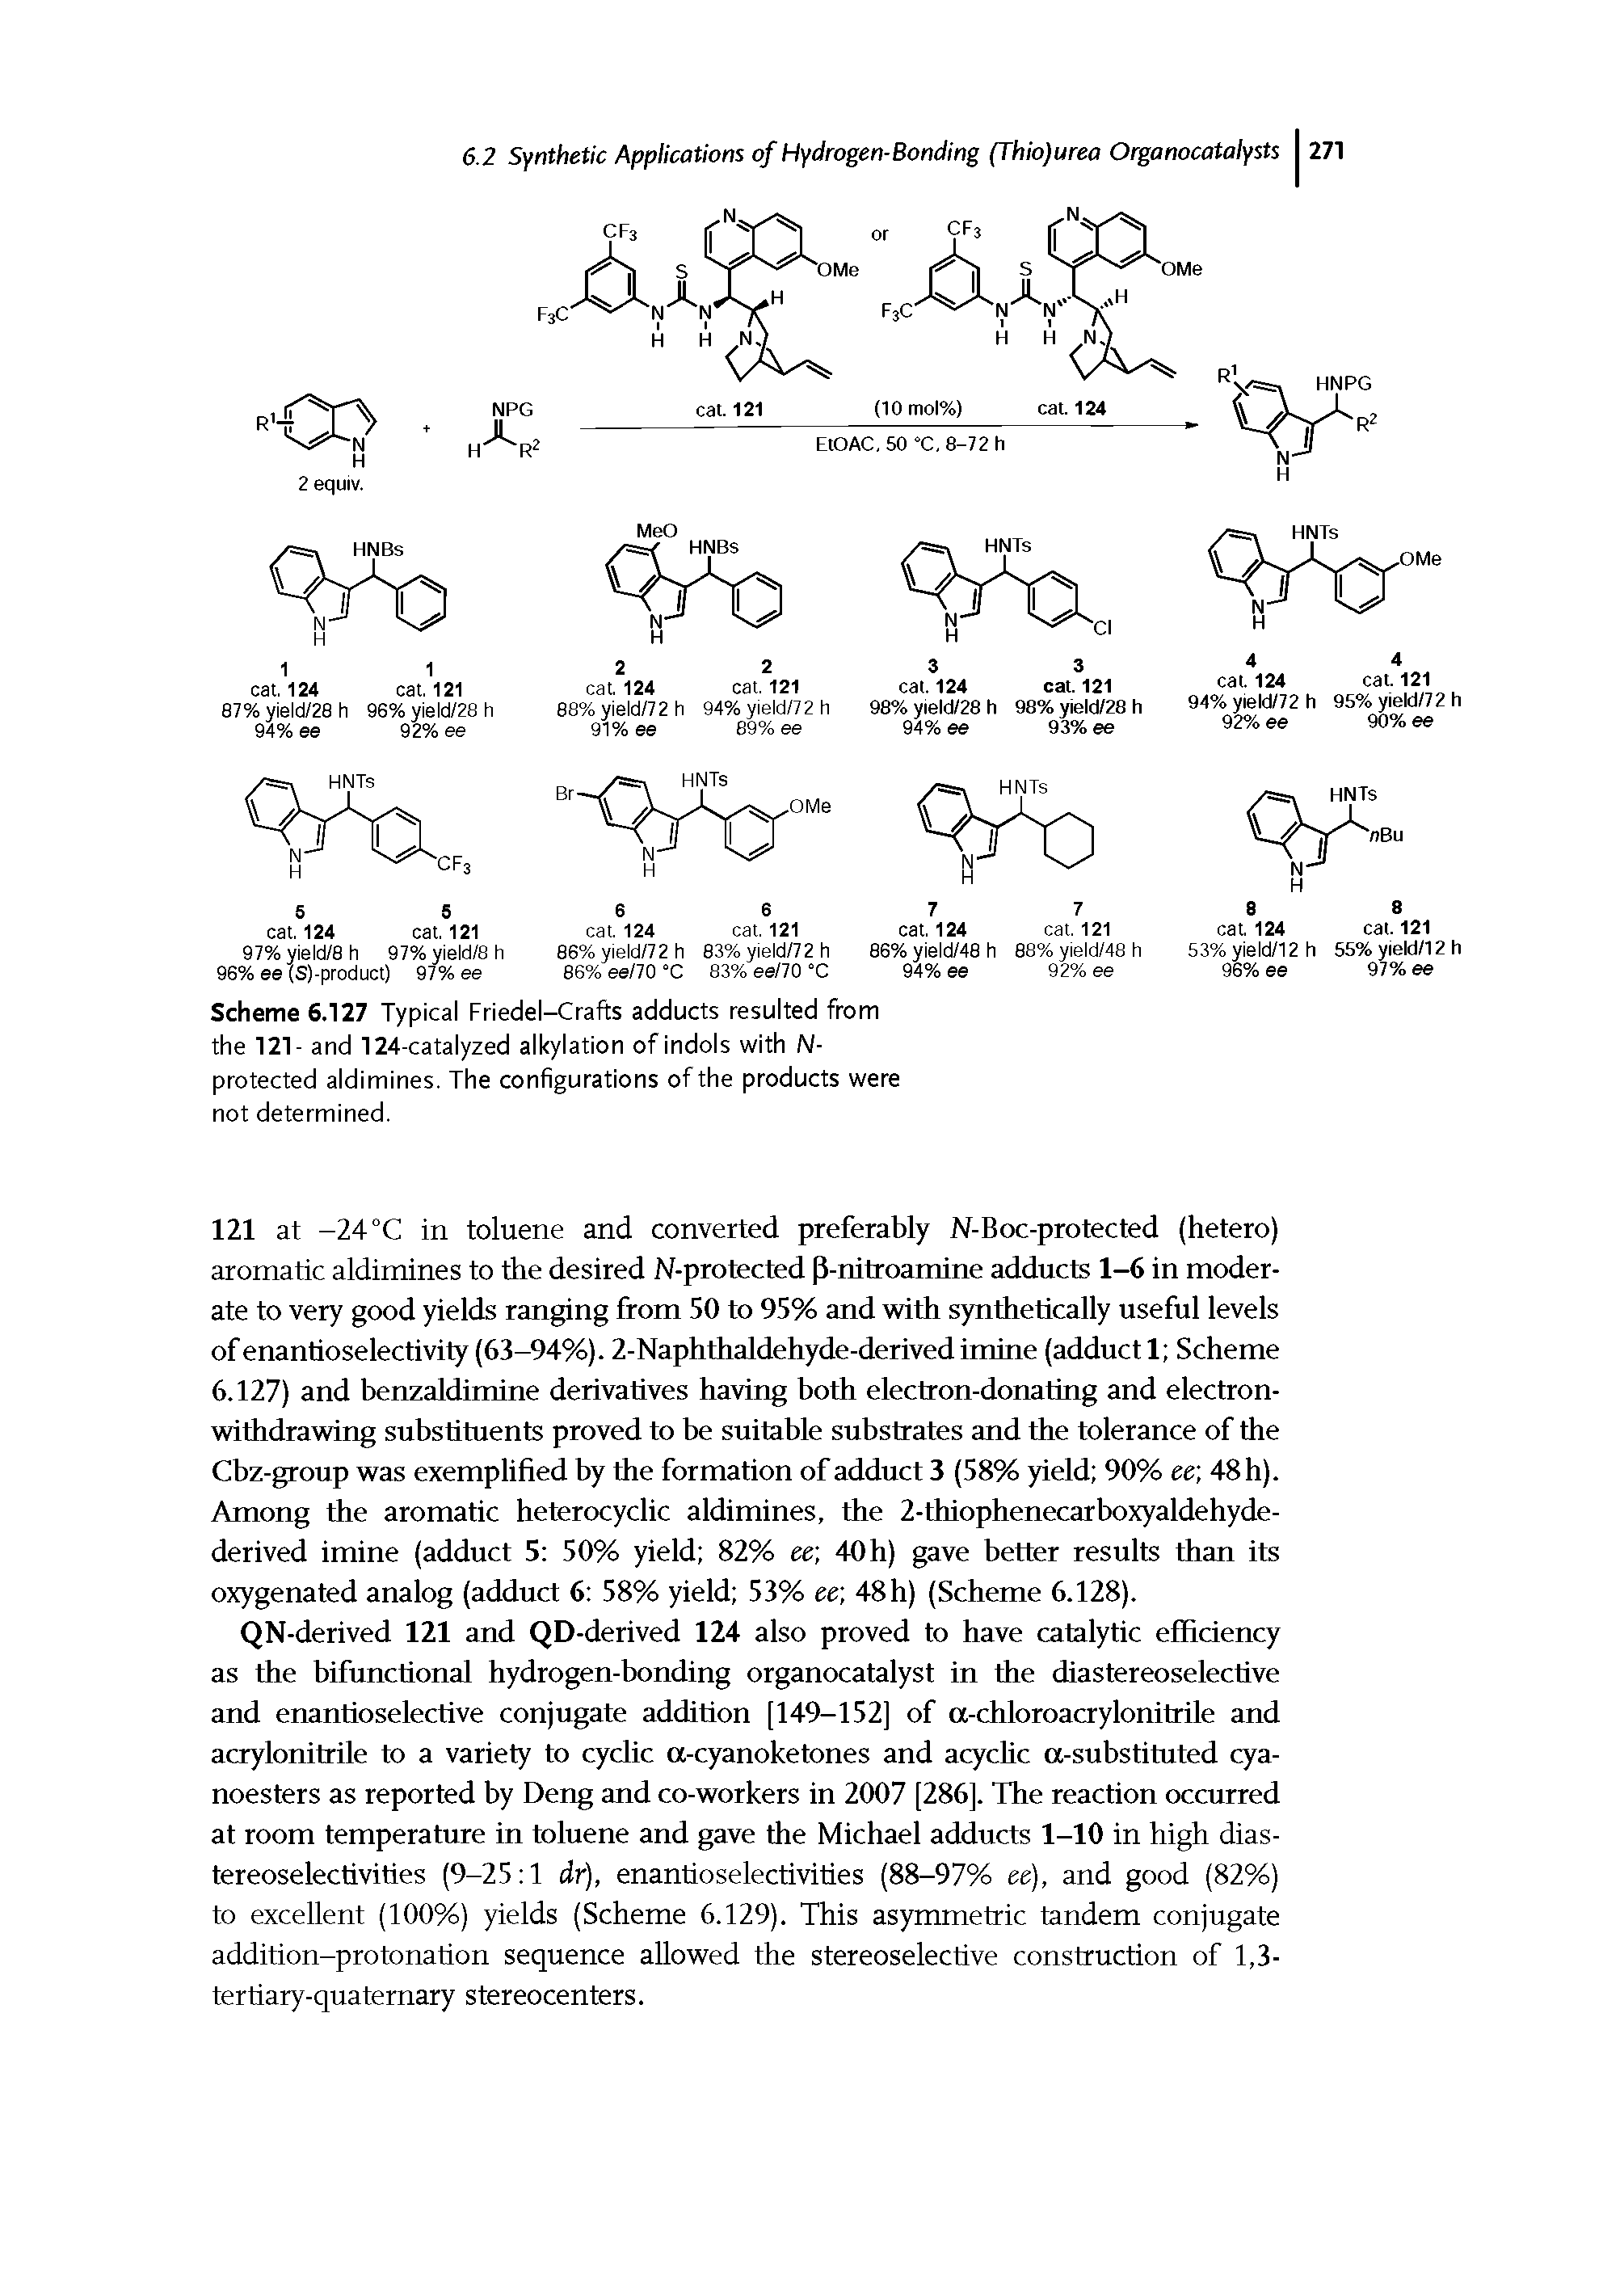 Scheme 6.127 Typical Fhedel-Crafts adducts resulted from the 121- and 124-catalyzed alkylation of indols with N-protected aldimines. The configurations of the products were not determined.